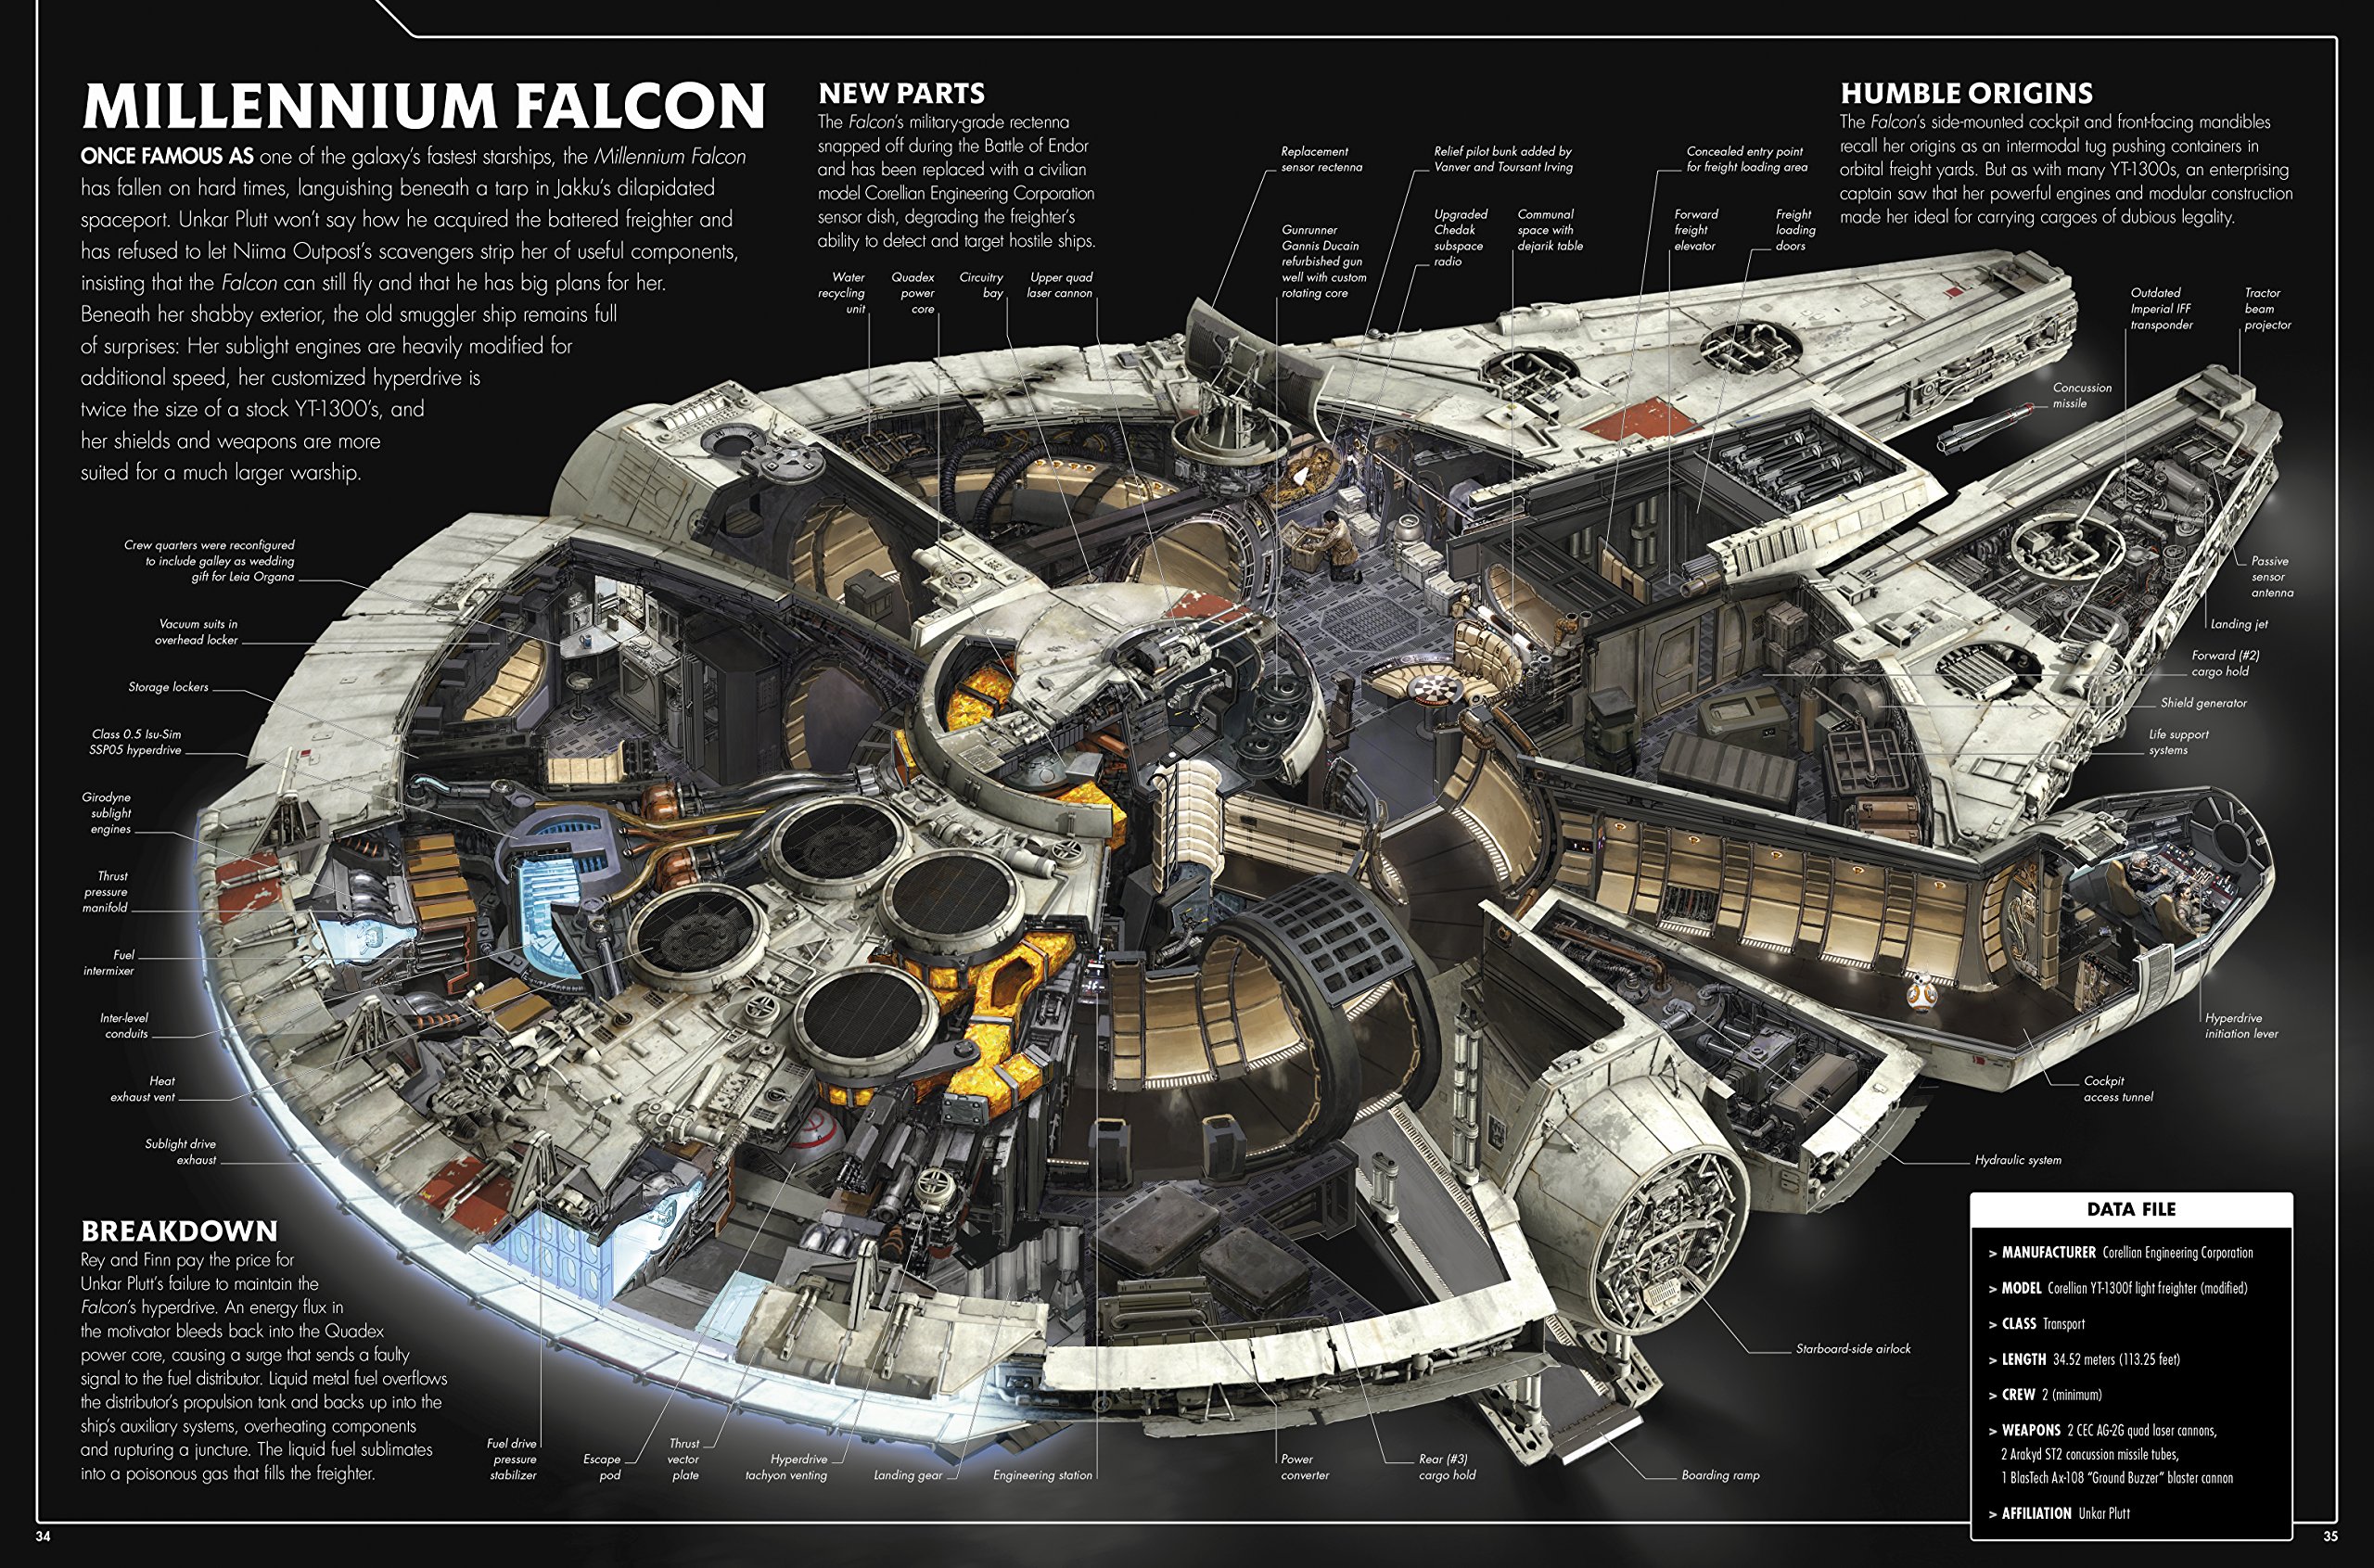 Star Wars: The Force Awakens Incredible Cross-Sections. 